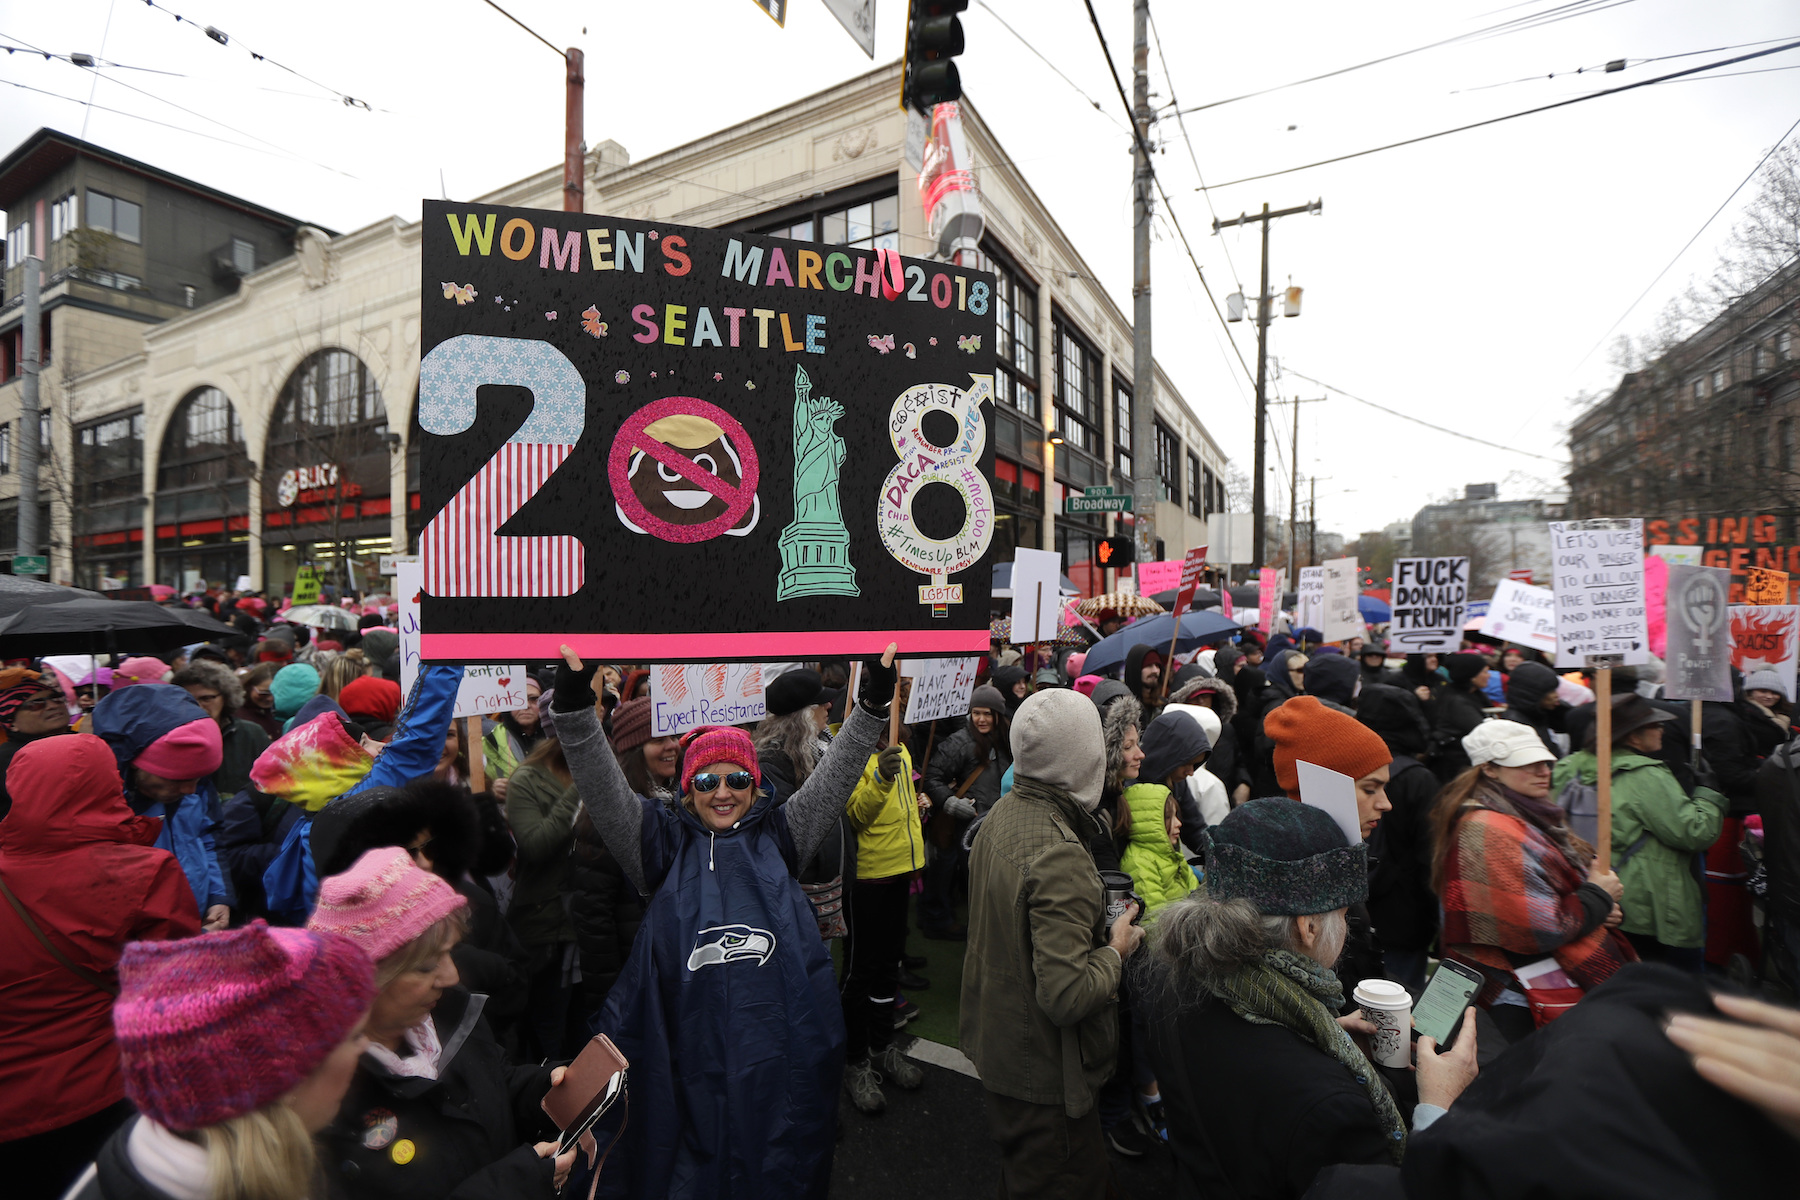 PHOTOS: Women's marches across the country | abc7.com